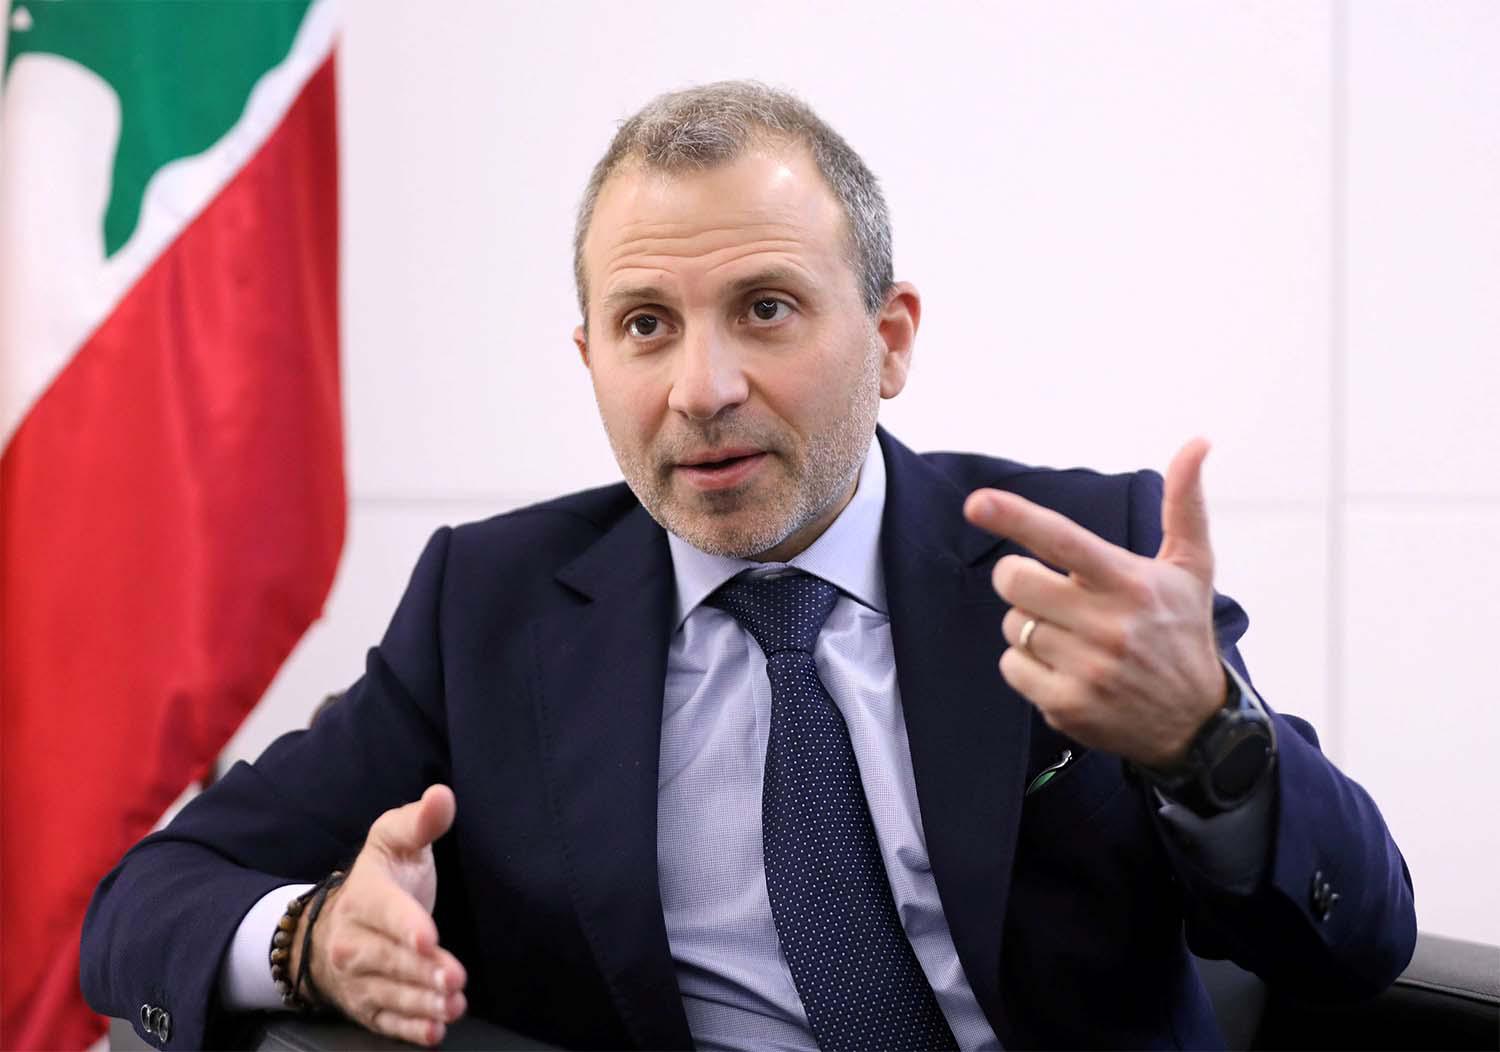 Bassil is the son-in-law of President Michel Aoun